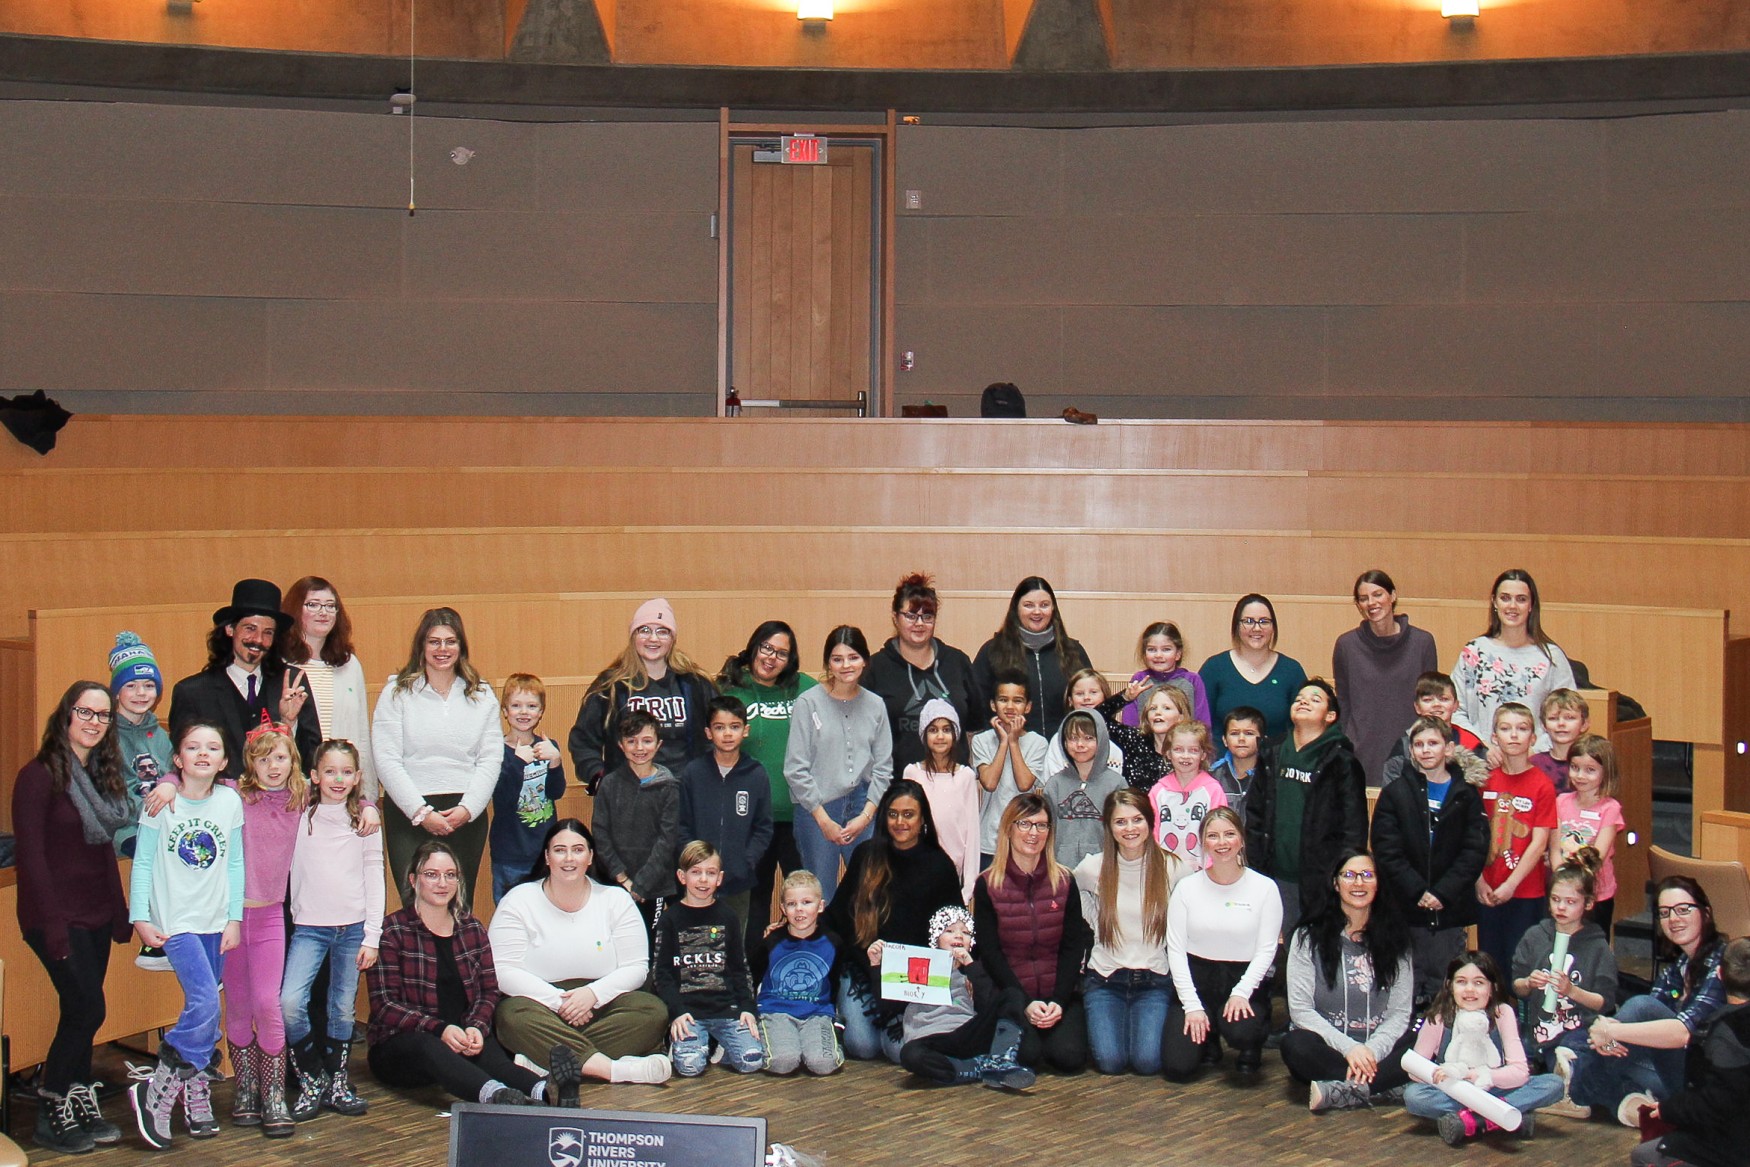 Group photo of TRU students and SD 73 students